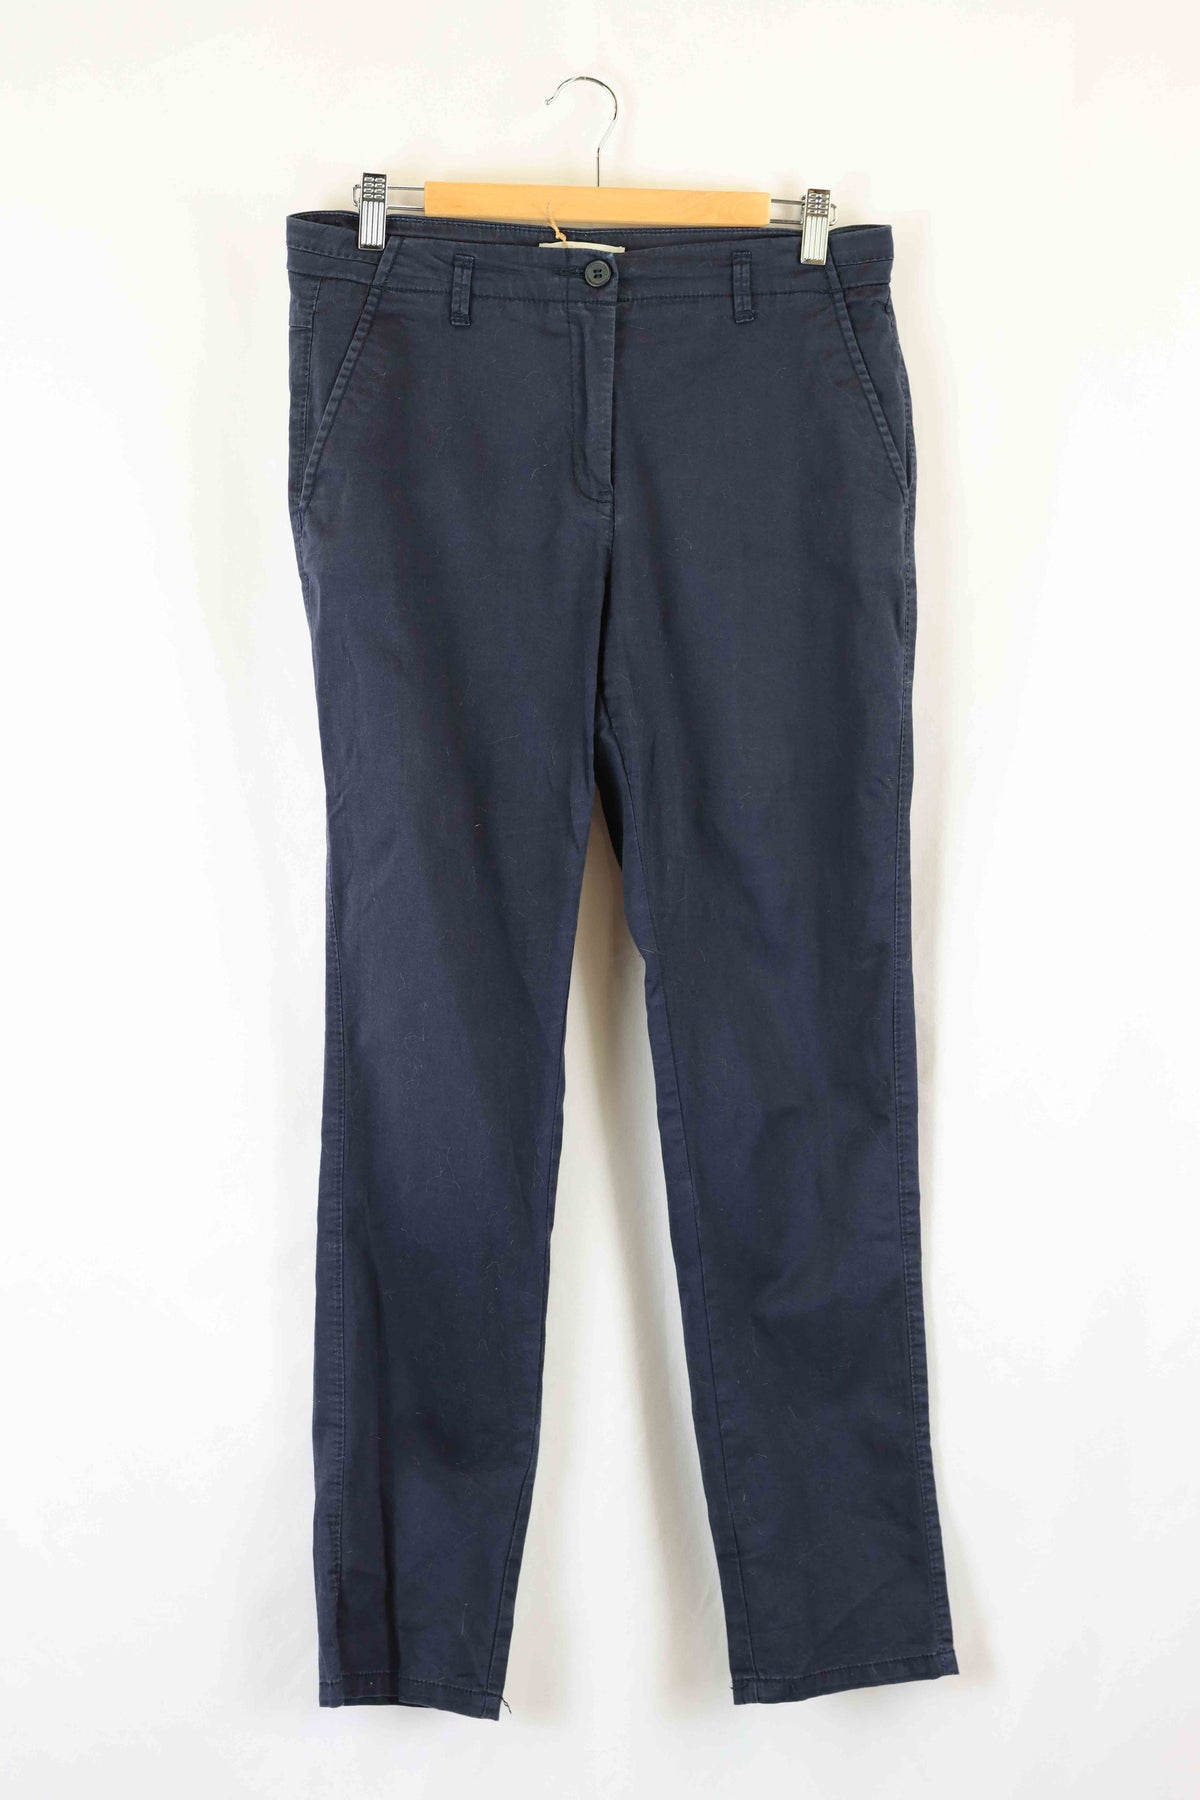 Country Road Navy Pants 10